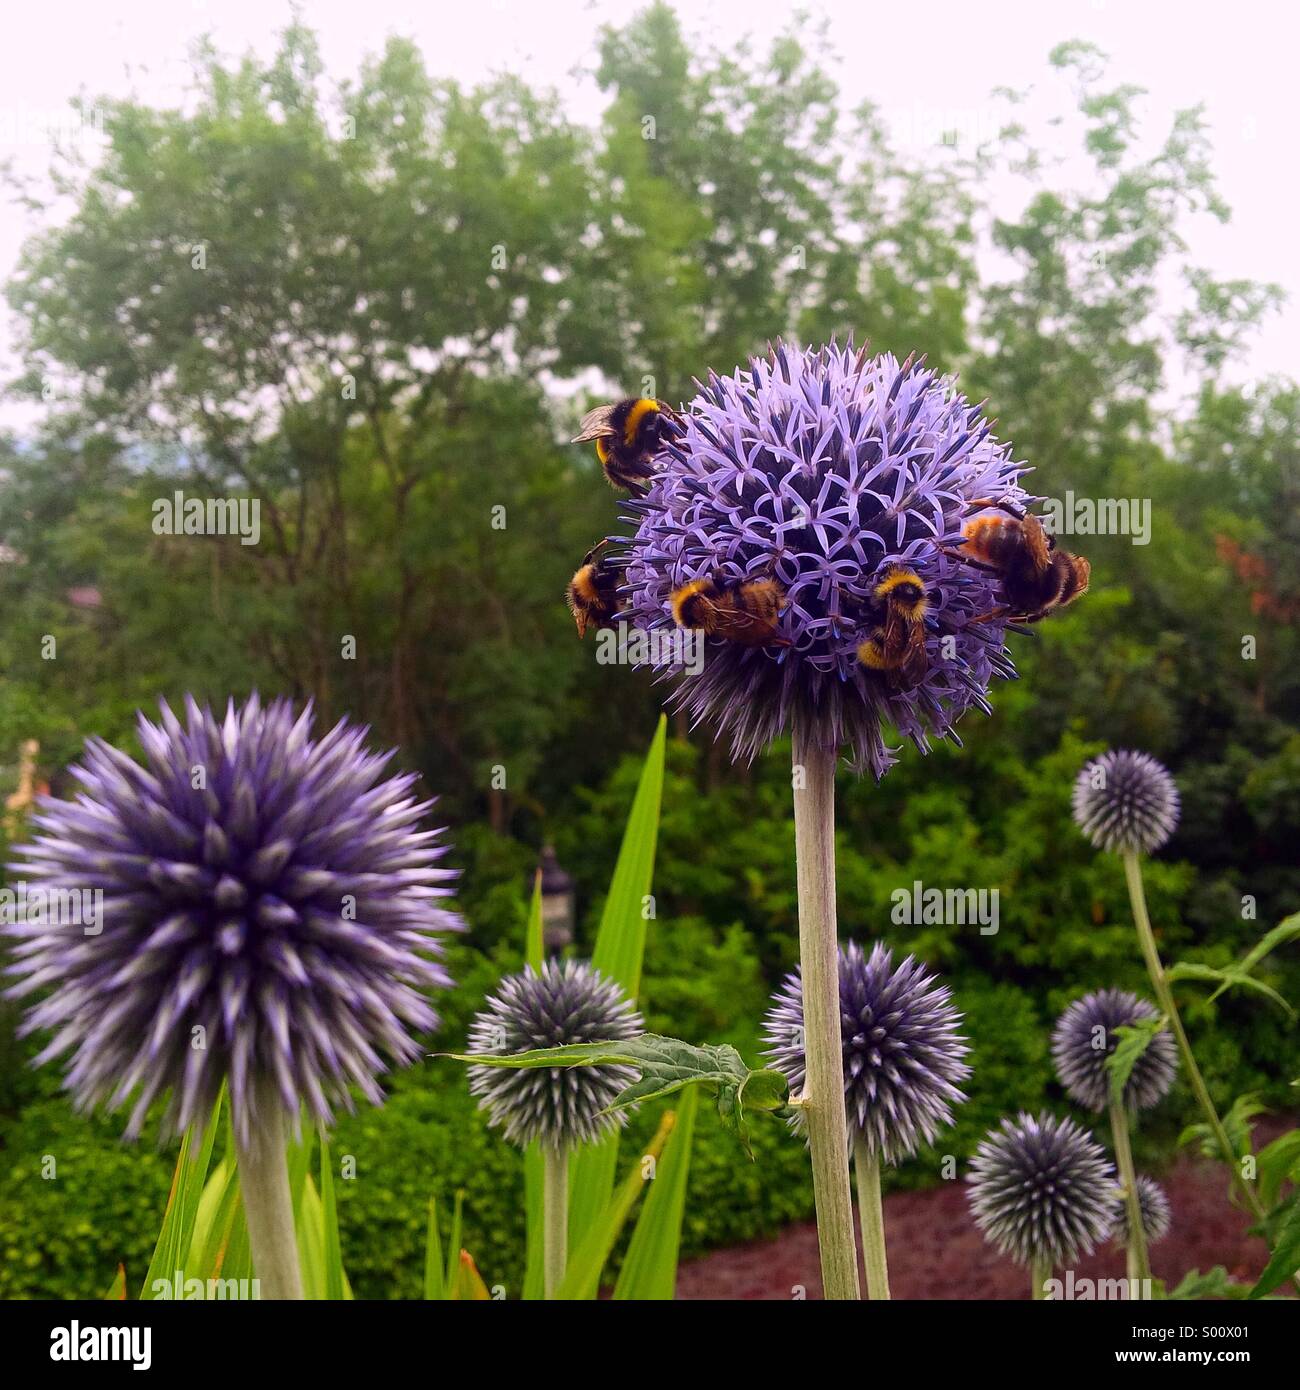 Bumble bees all over a thistle flower in an English garden. Stock Photo